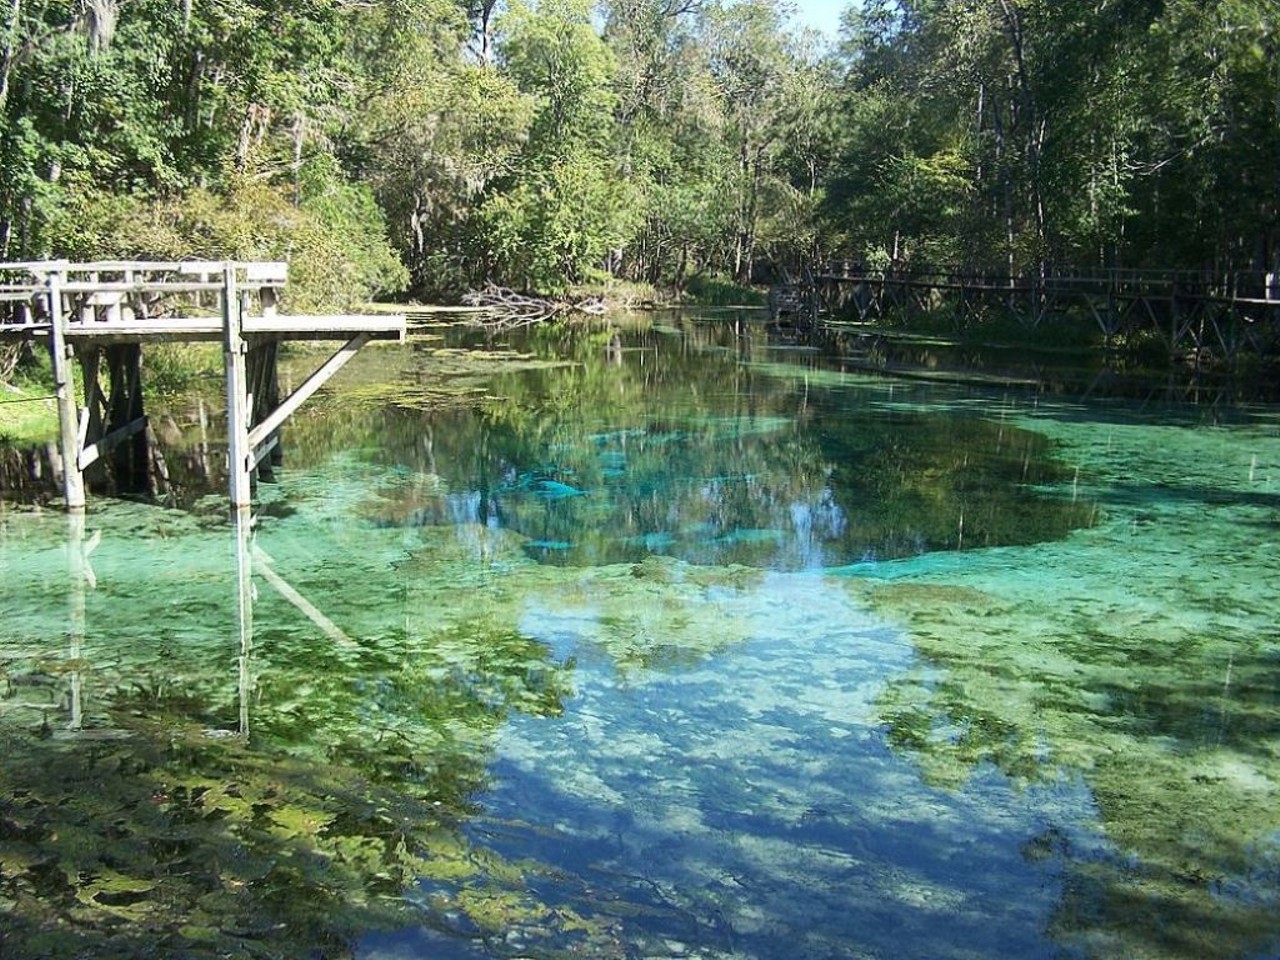  Ruth B. Kirby Gilchrist Blue Springs State Park 
7450 N.E. 60 St., High Springs
There&#146;s something magical about taking a dip in crystal clear water.
Photo via Glichrist Blue Spring State Park/Flickr, Paul Clark